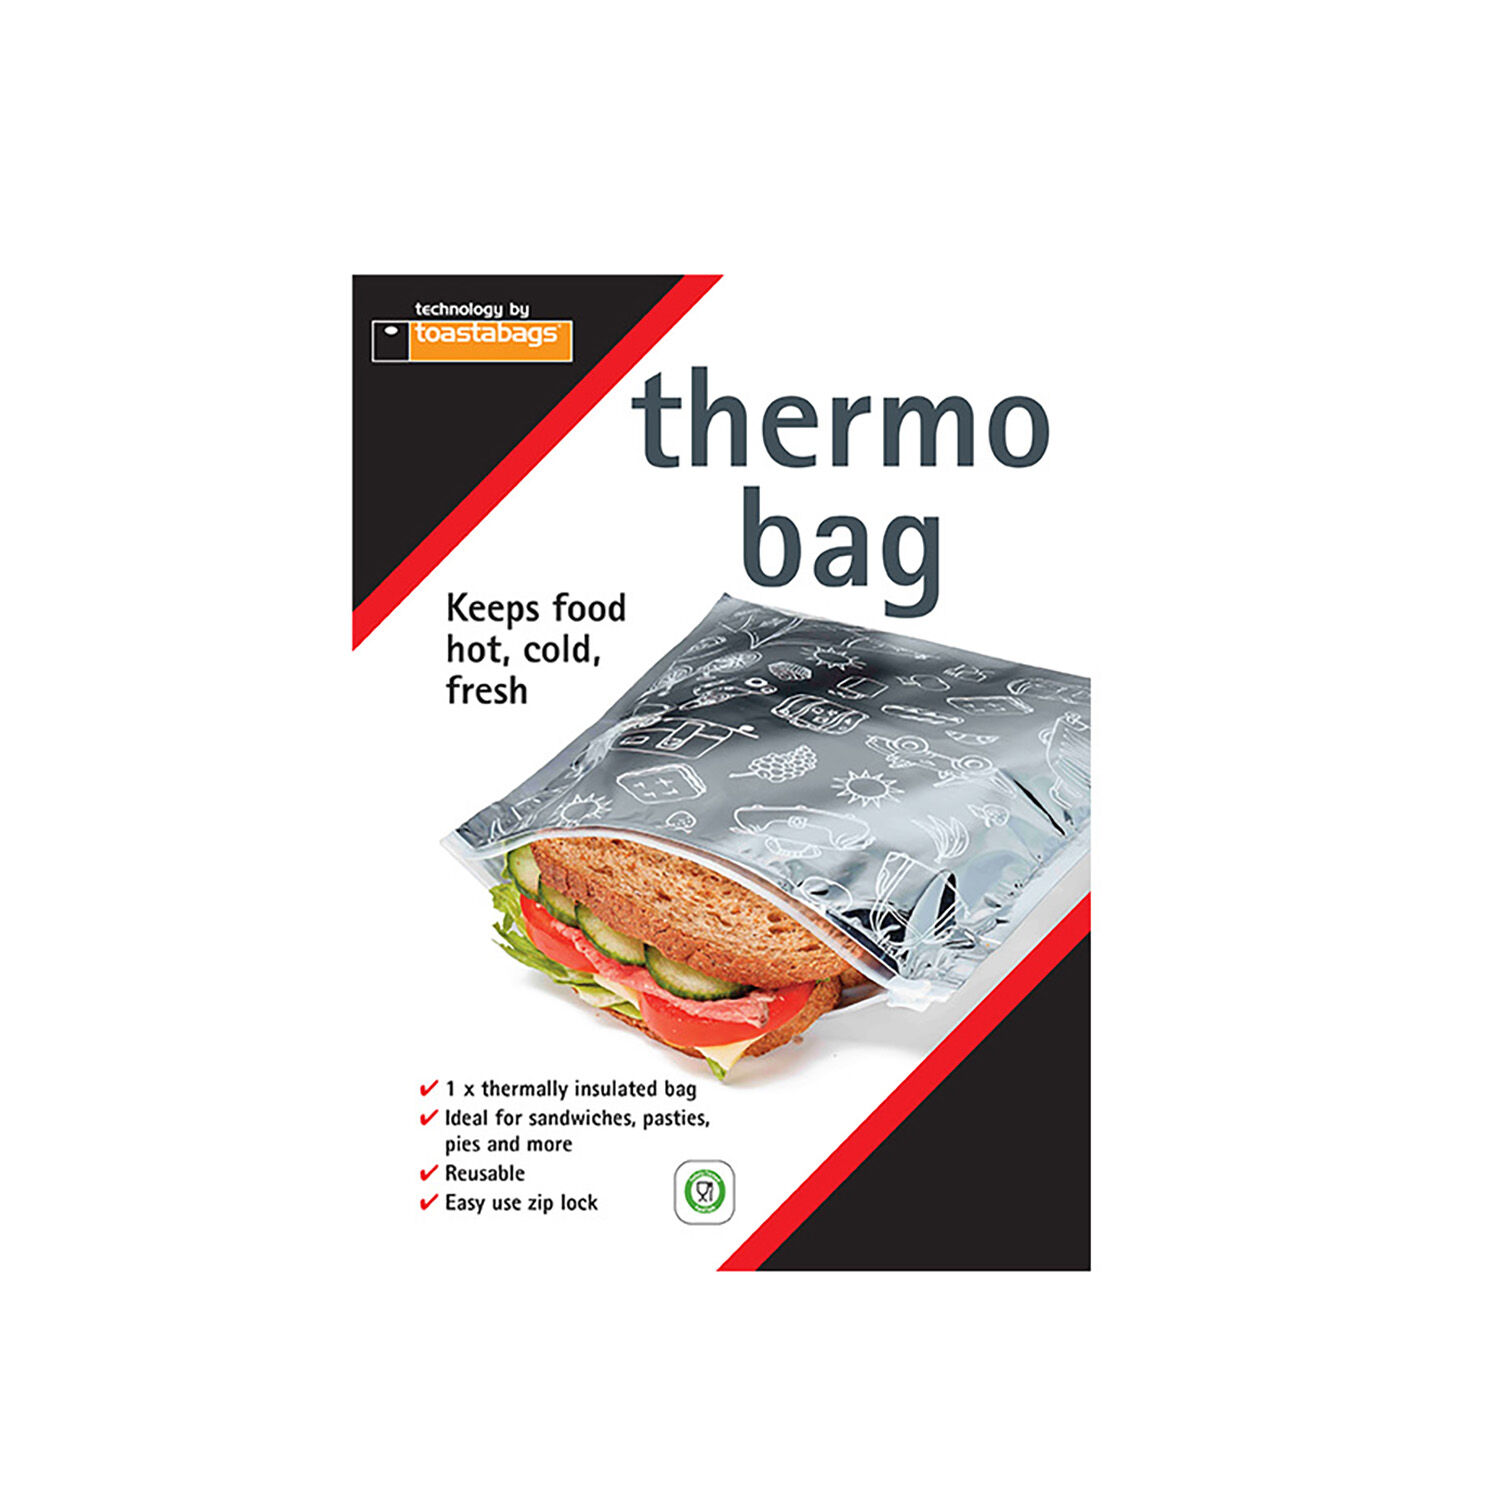 1 1 FREE TOASTBAGS THERMA BAG INSULATED ZIP LOCK BAG KEEPS FOOD HOT COLD FRESH